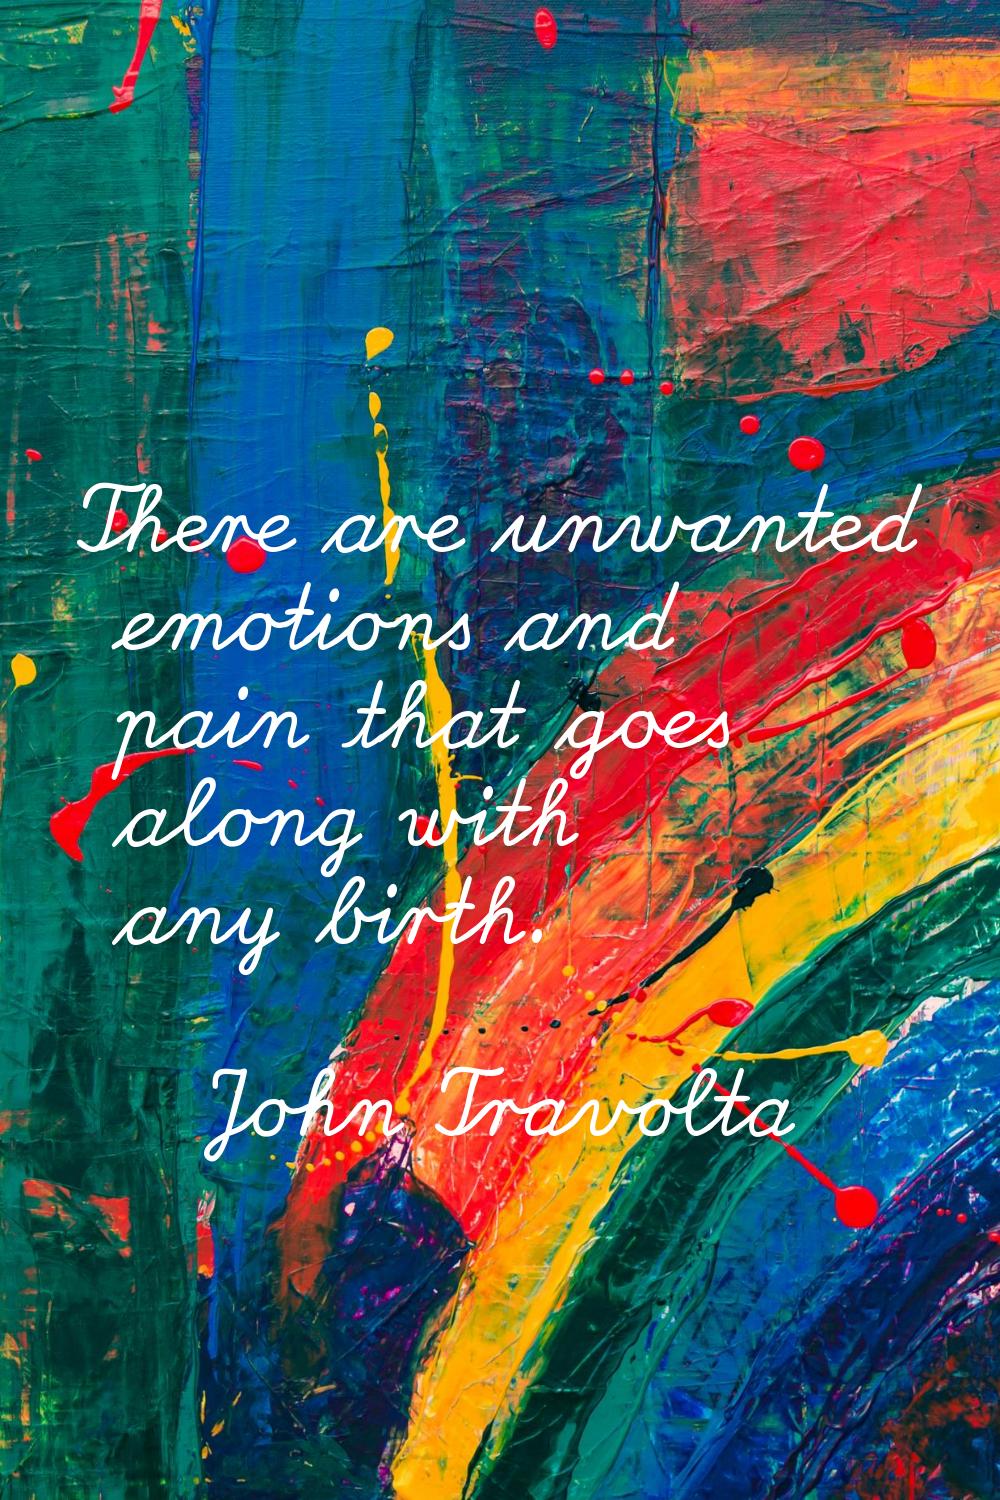 There are unwanted emotions and pain that goes along with any birth.